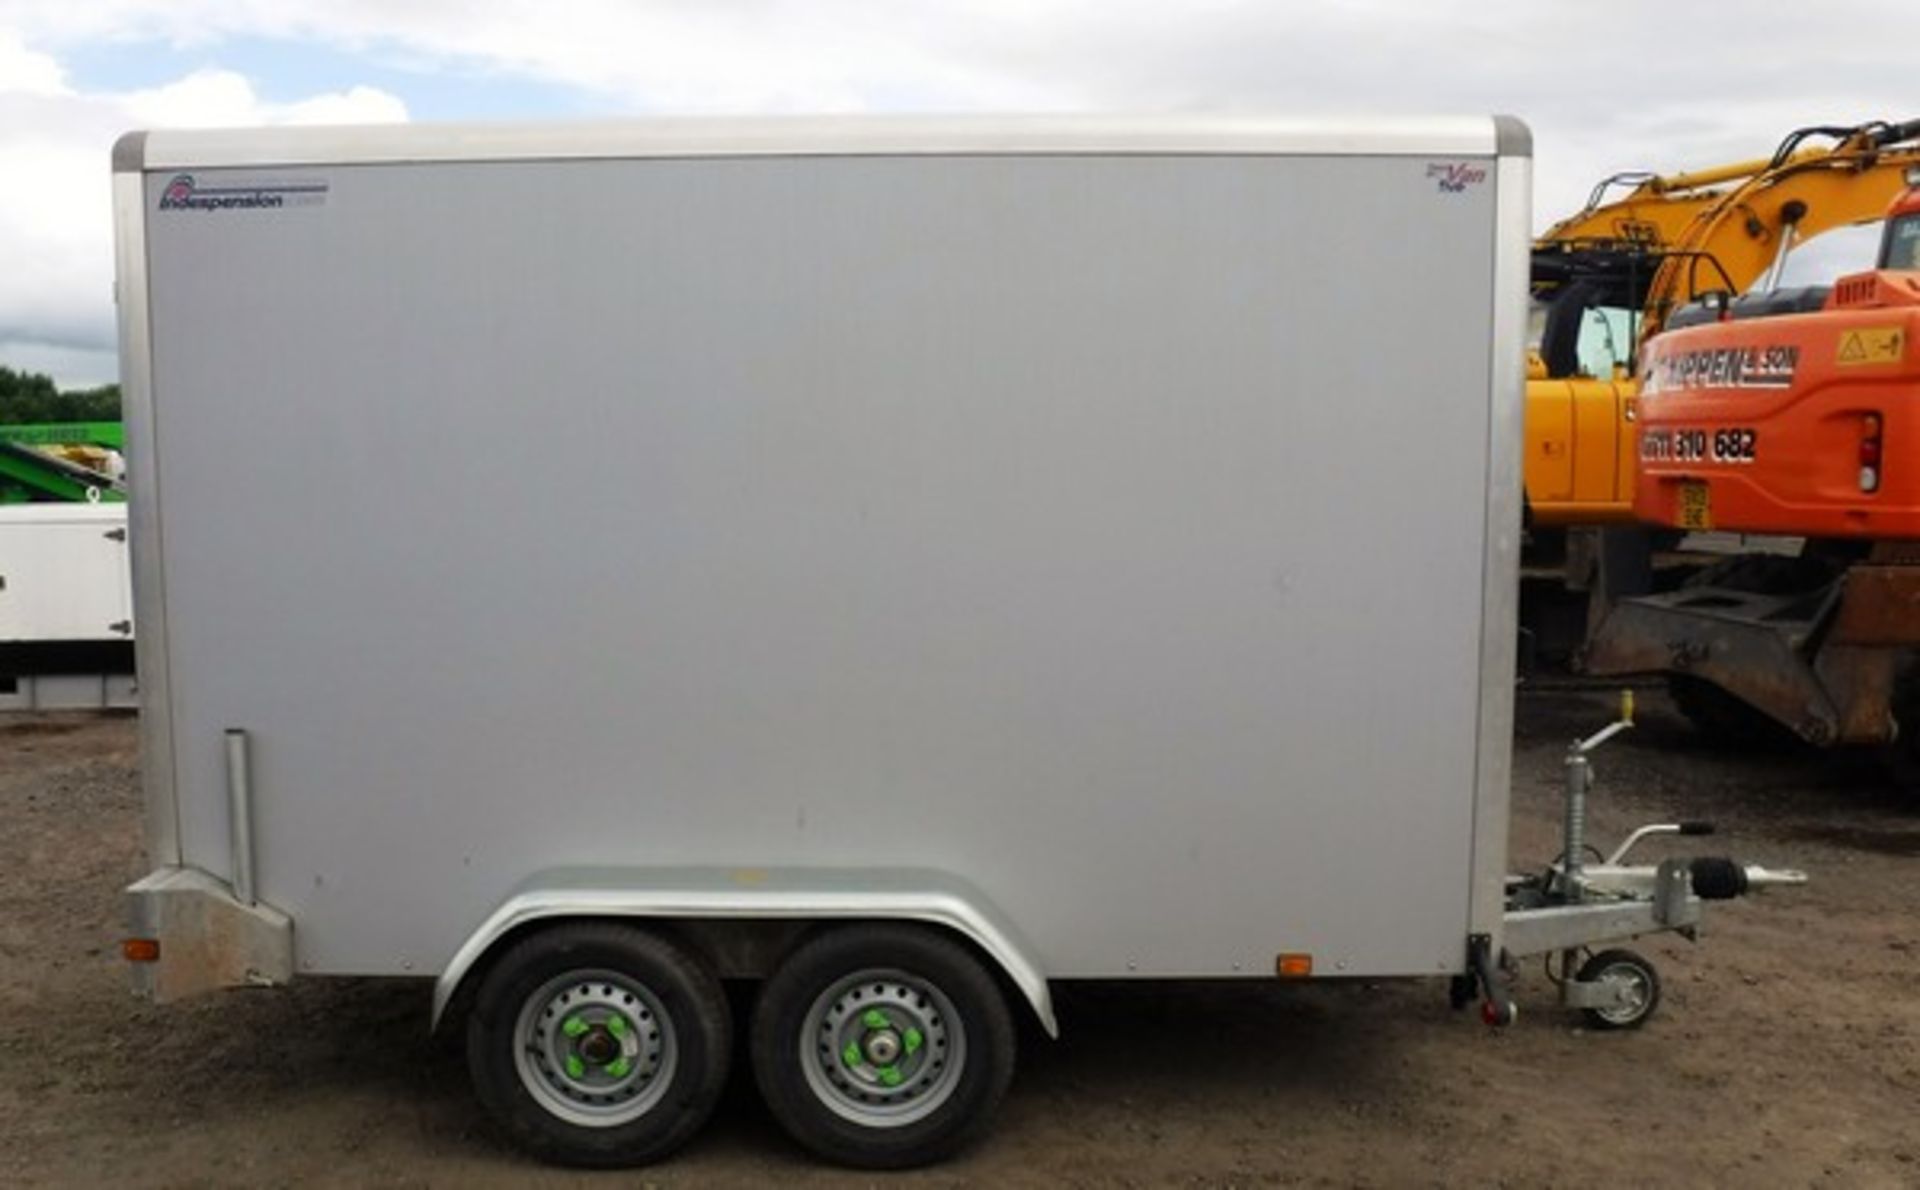 INDESPENSION BOX TRAILER WITH 2 OPENING BACK DOORS & 1 SIDE DOOR, 10FT X 5FT (APPROX) S/N213526 ASSE - Image 4 of 6